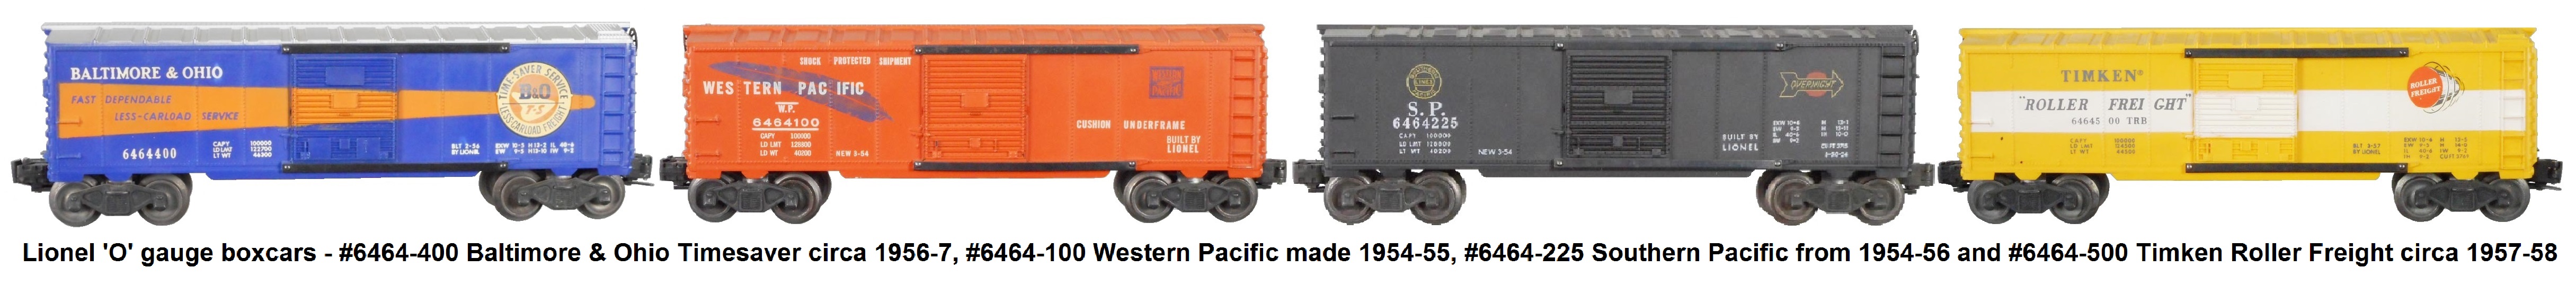 Lionel 6464 series box cars from the post-war era.